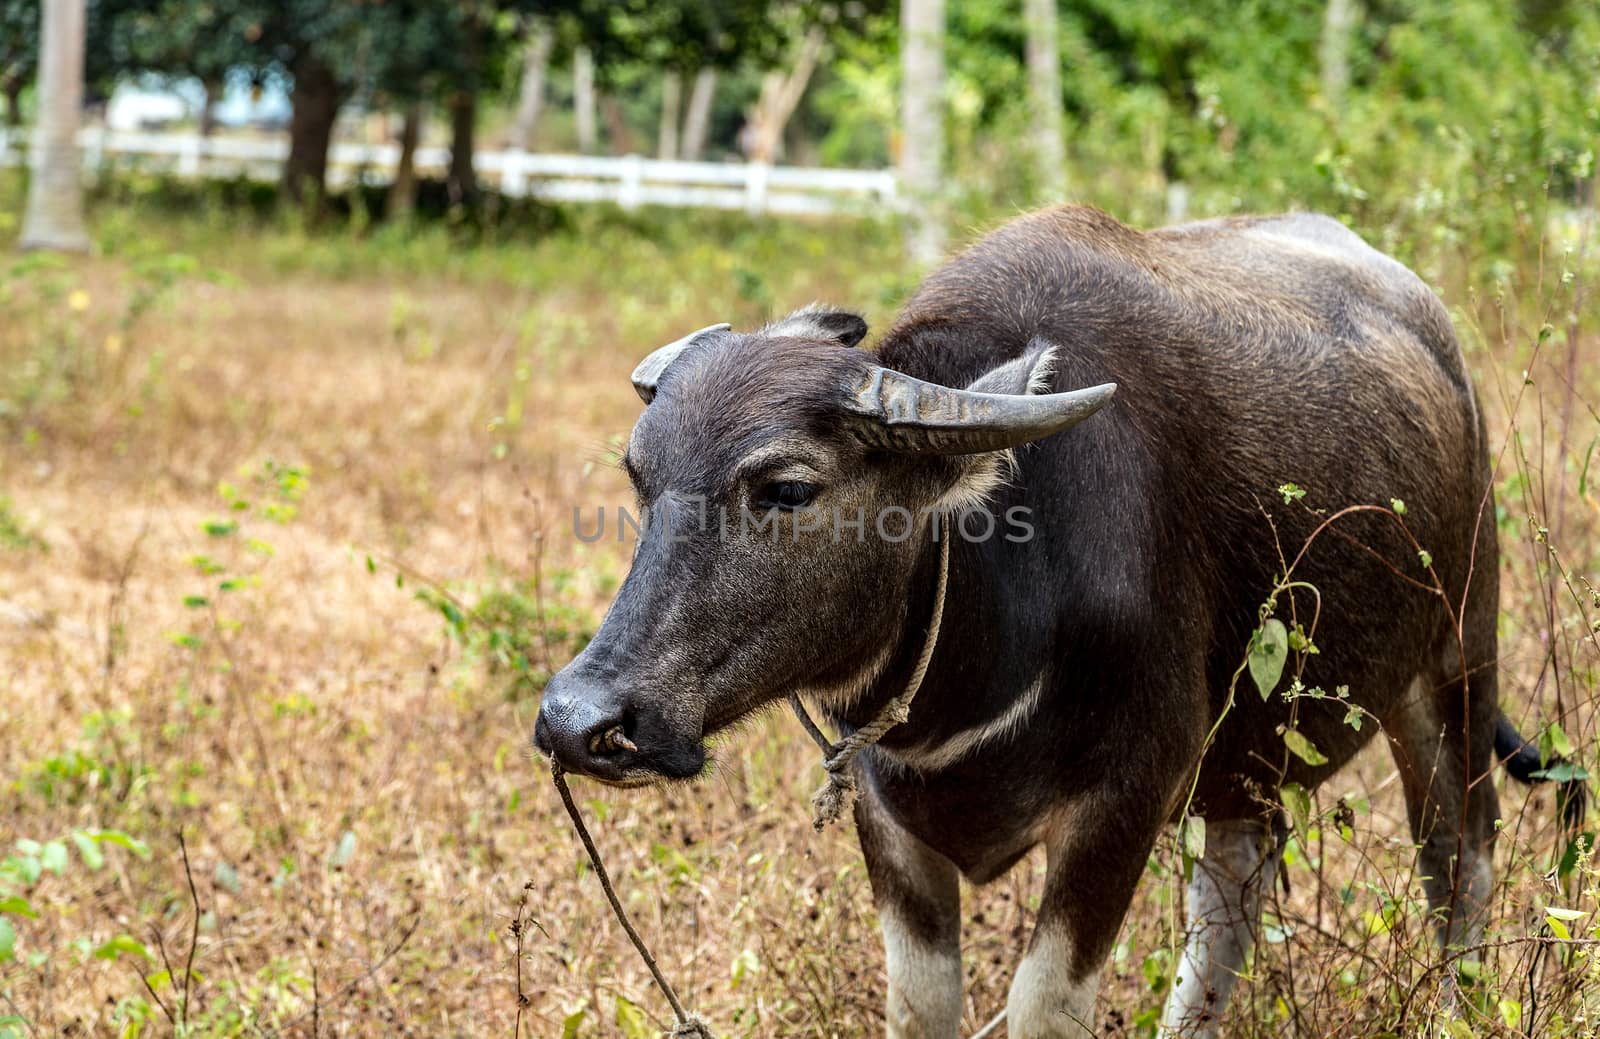 Portrait ox bull Asia water buffalo cattle farm close up side view Carabao in Thailand forest